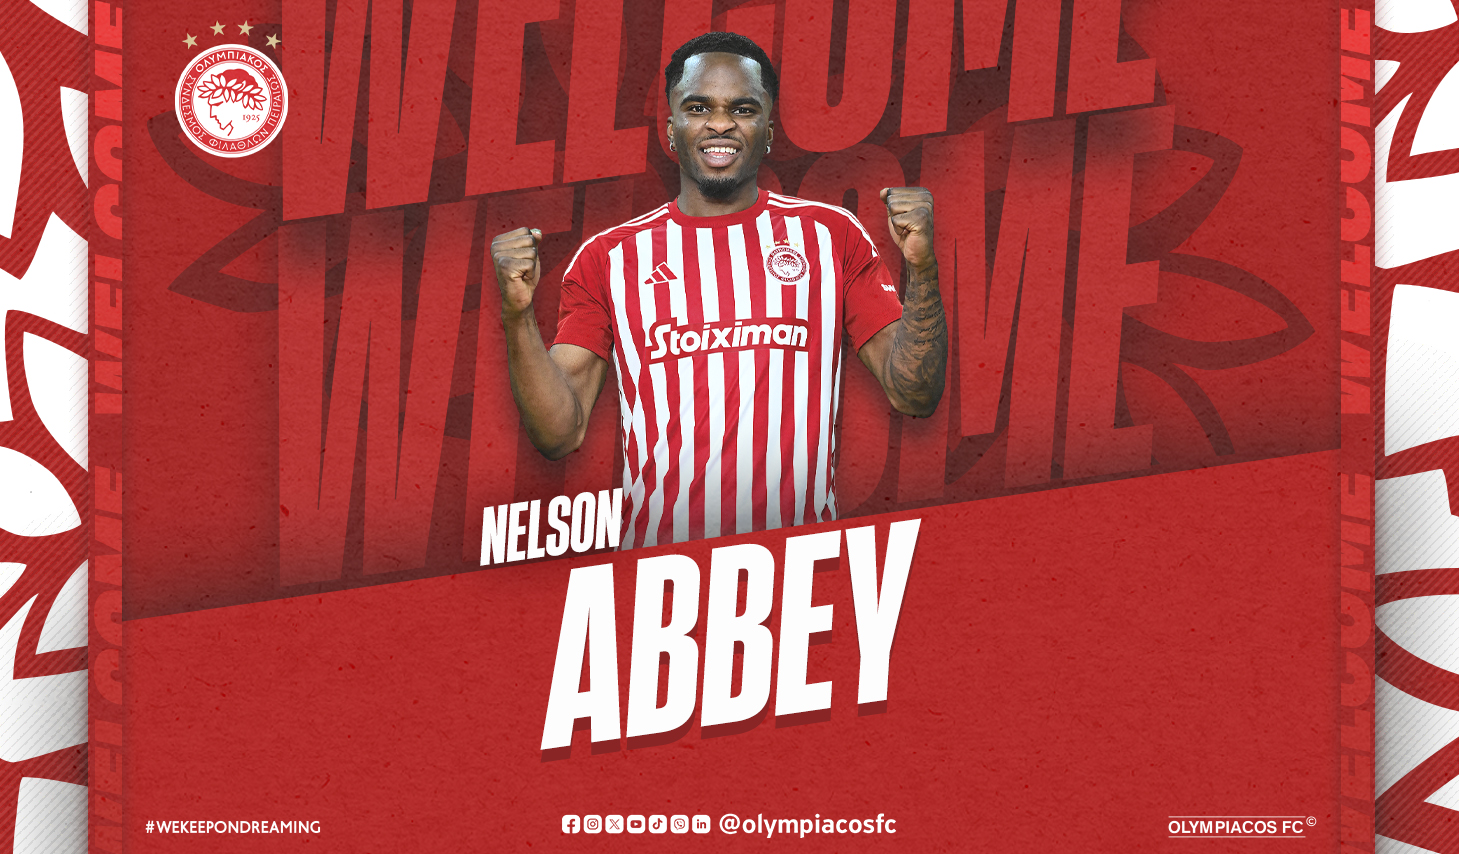 Olympiacos signs Nelson Abbey